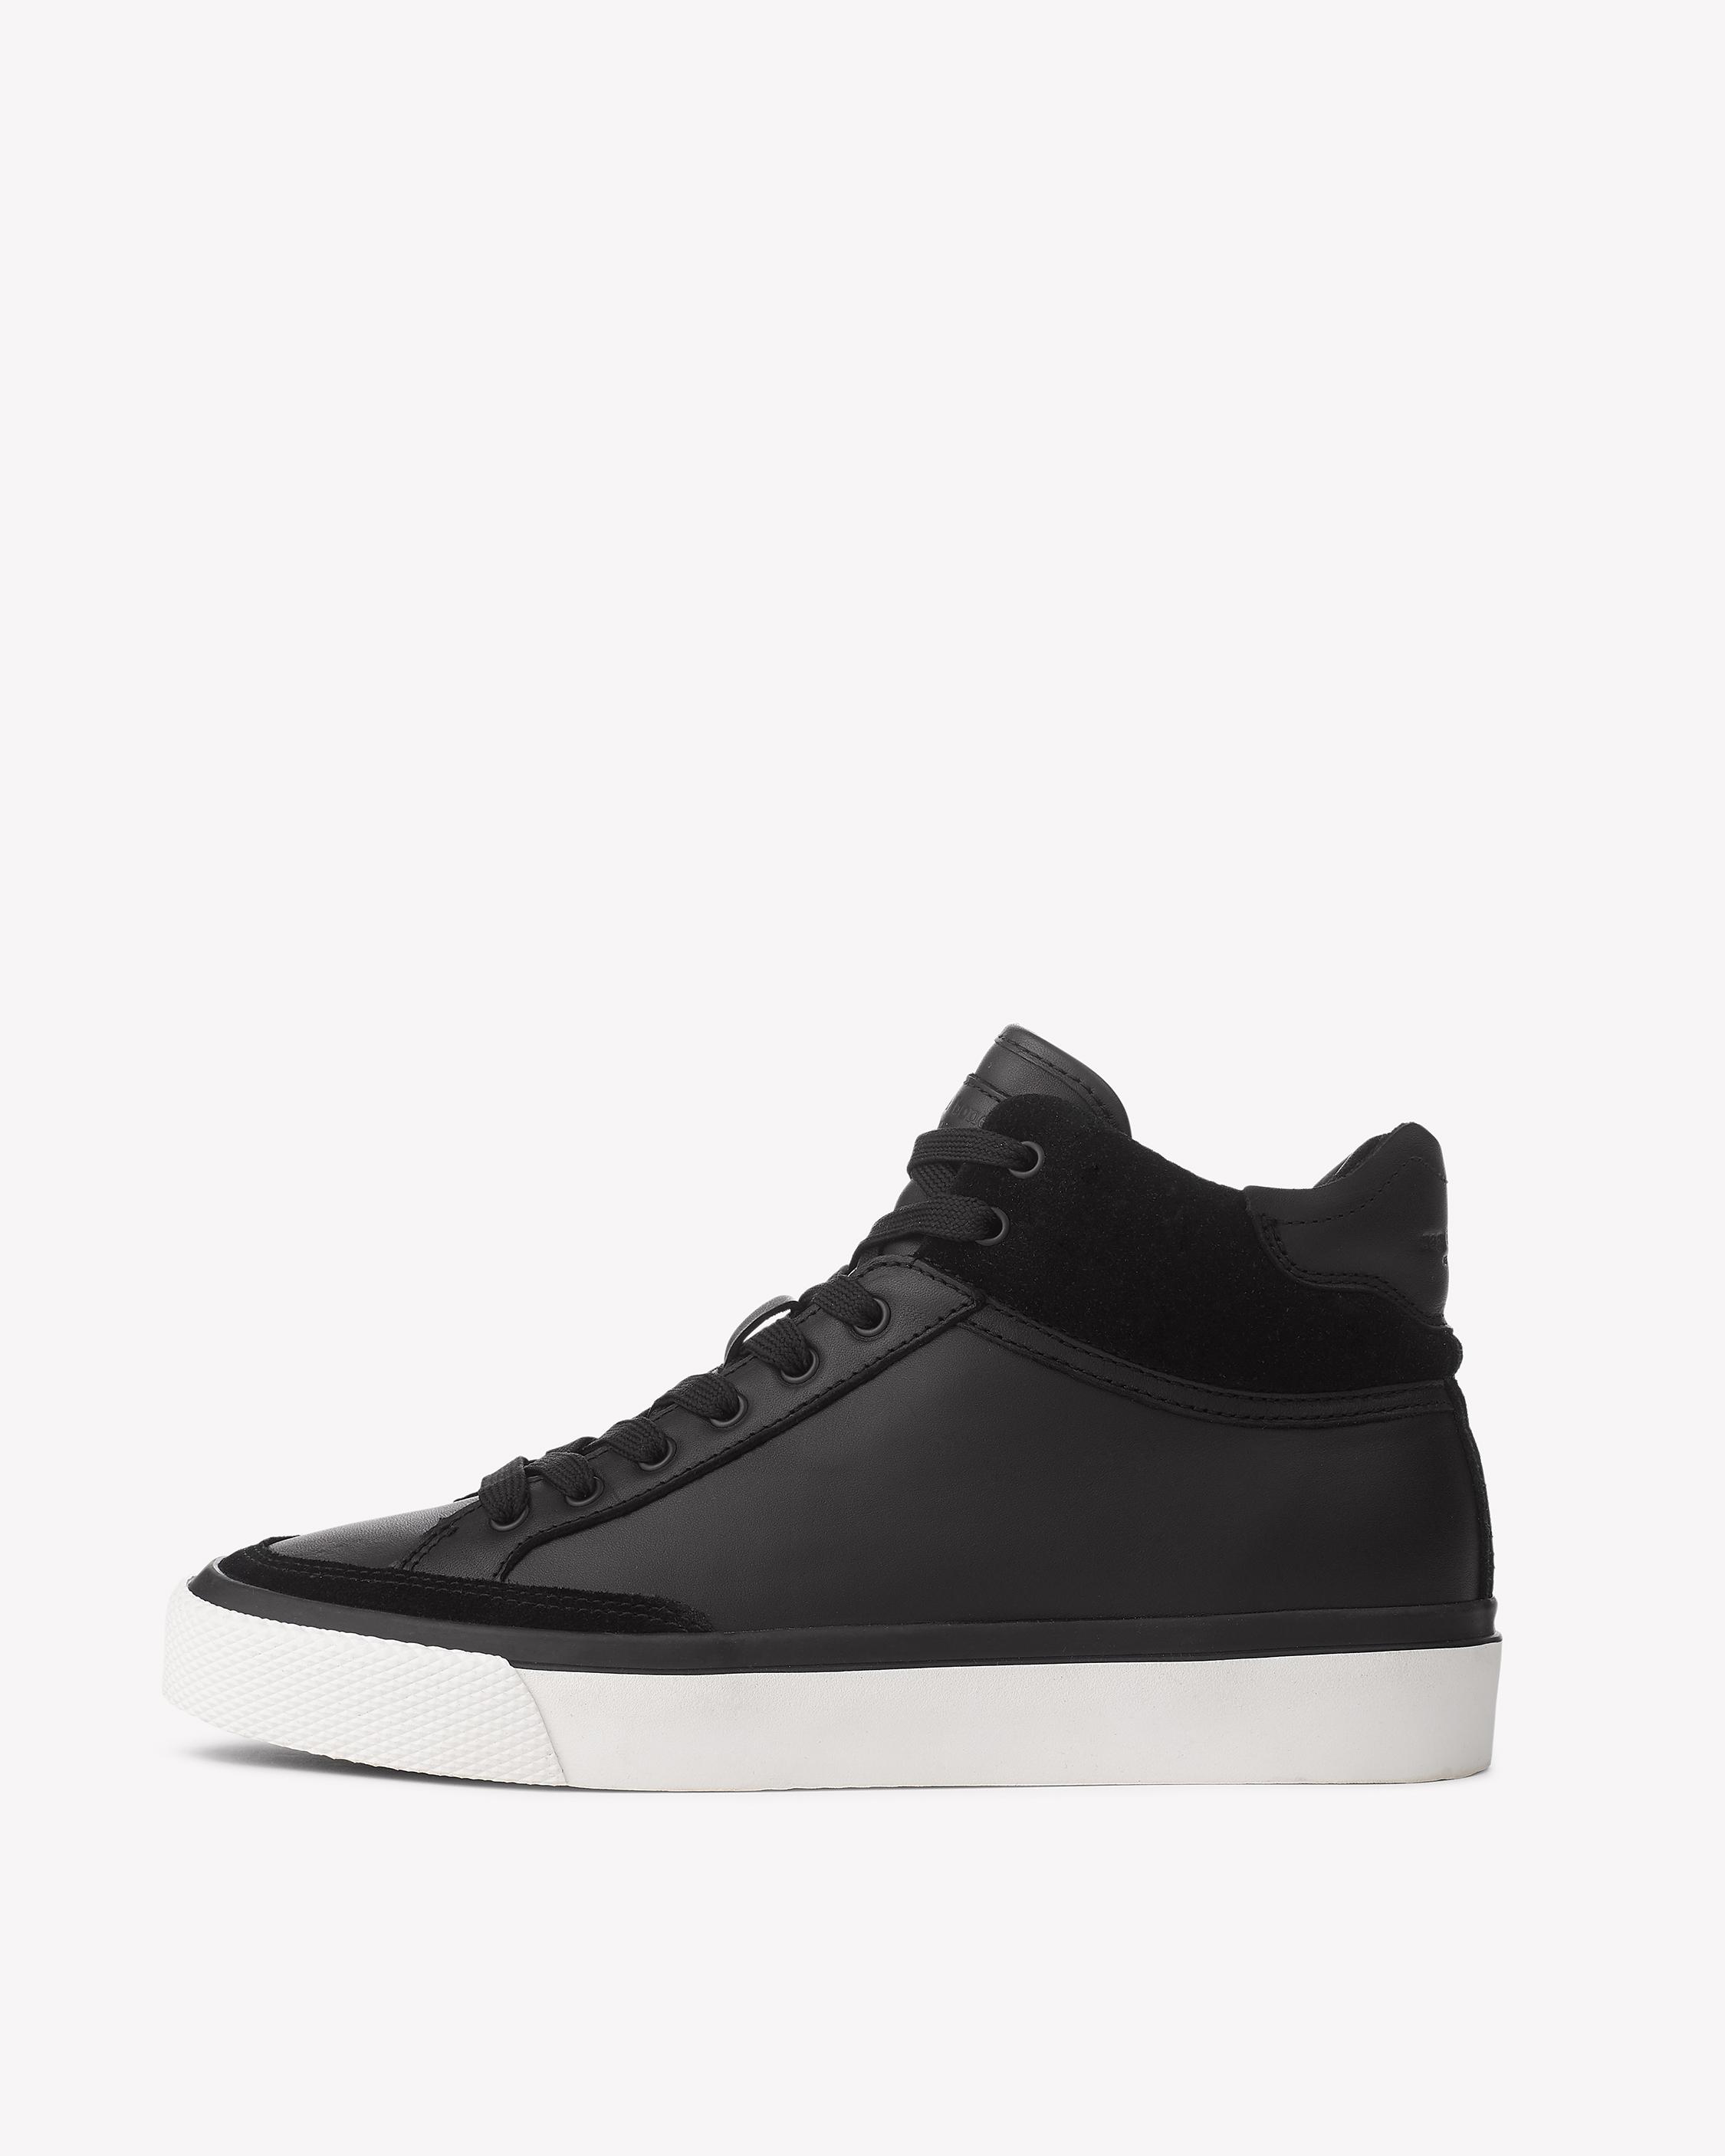 rag and bone army high top sneakers